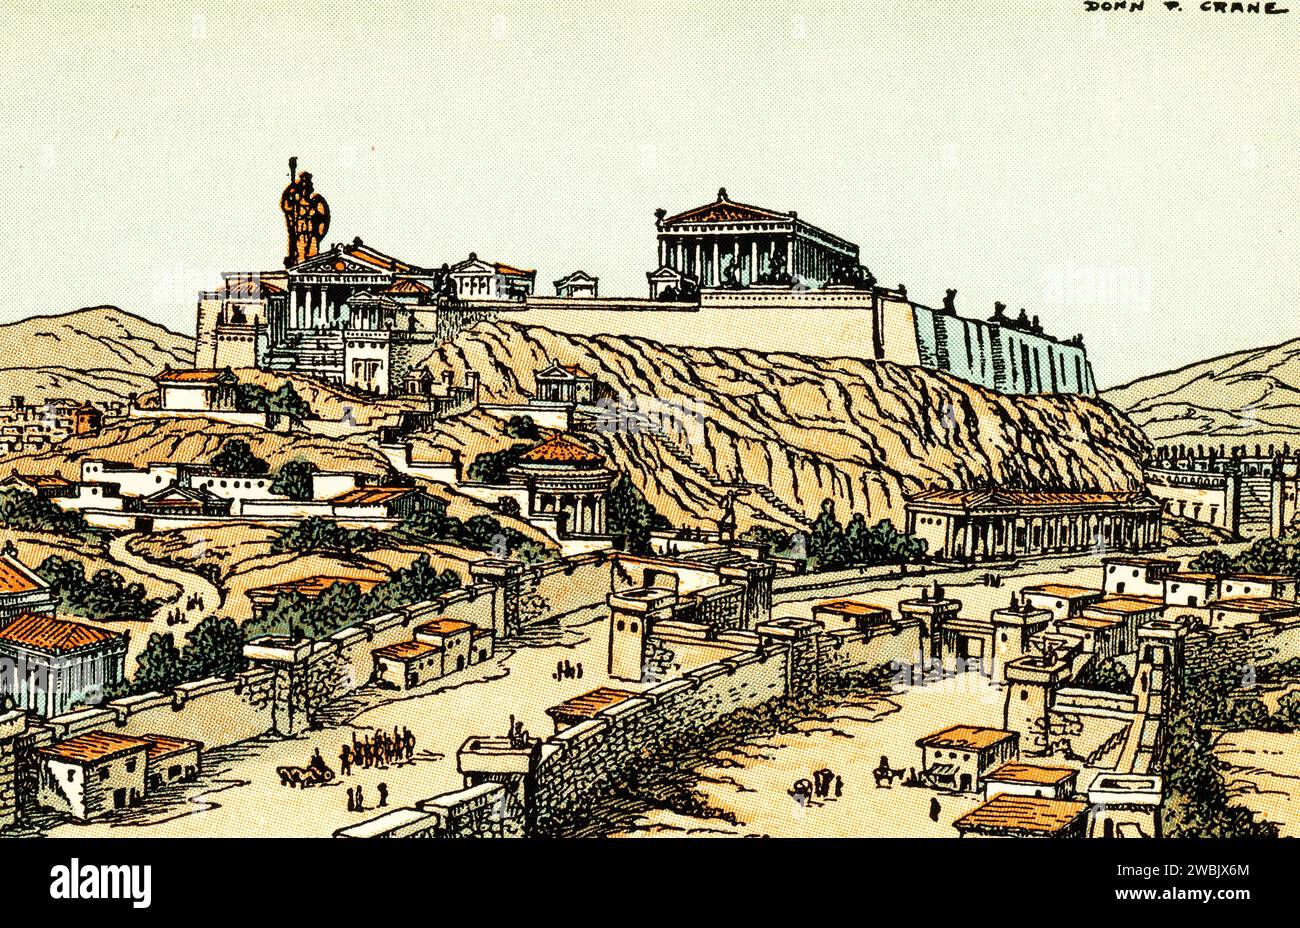 An artist's reconstruction of the Acropolis of Athens as it was in the time of Pericles, c1930. By Donn Philip Crane (1878-1944). The Acropolis of Athens is an ancient citadel located above the city of Athens, Greece. While there is evidence that the hill was inhabited as early as the fourth millennium BC, it was Pericles (c495-429 BC) in the fifth century BC who coordinated the construction of the buildings whose present remains are the site's most important ones, including the Parthenon, the Propylaea, the Erechtheion and the Temple of Athena Nike. Stock Photo